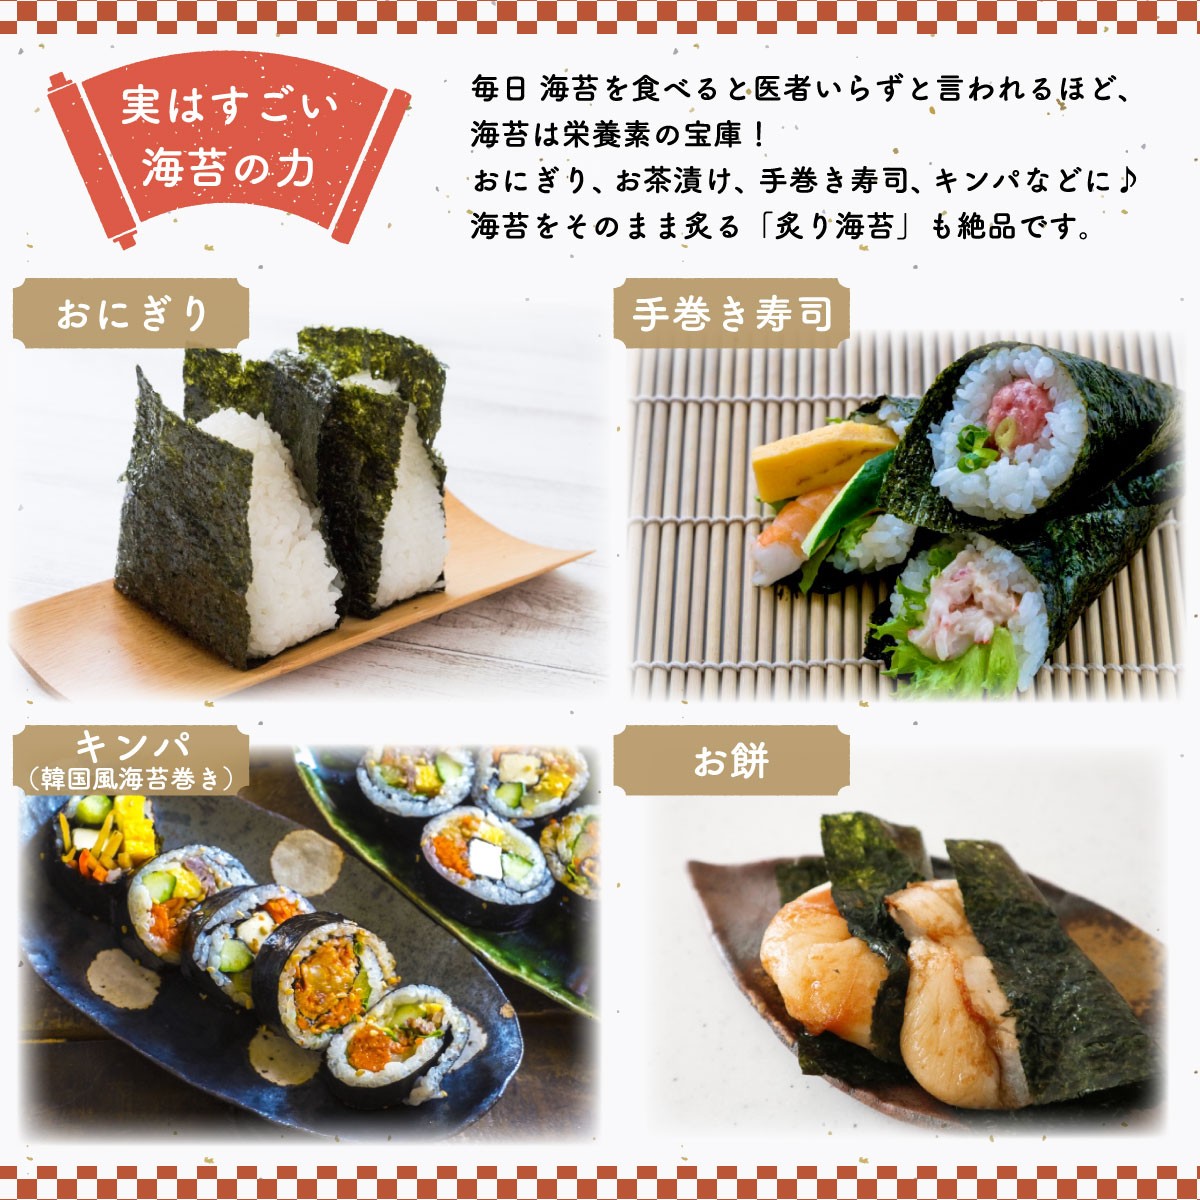  domestic production all type . seaweed high capacity 50 sheets entering Ibaraki seaweed business use home carefuly selected prejudice good quality seaweed paste board paste all shape . bargain . seaweed [ all type seaweed ] TY